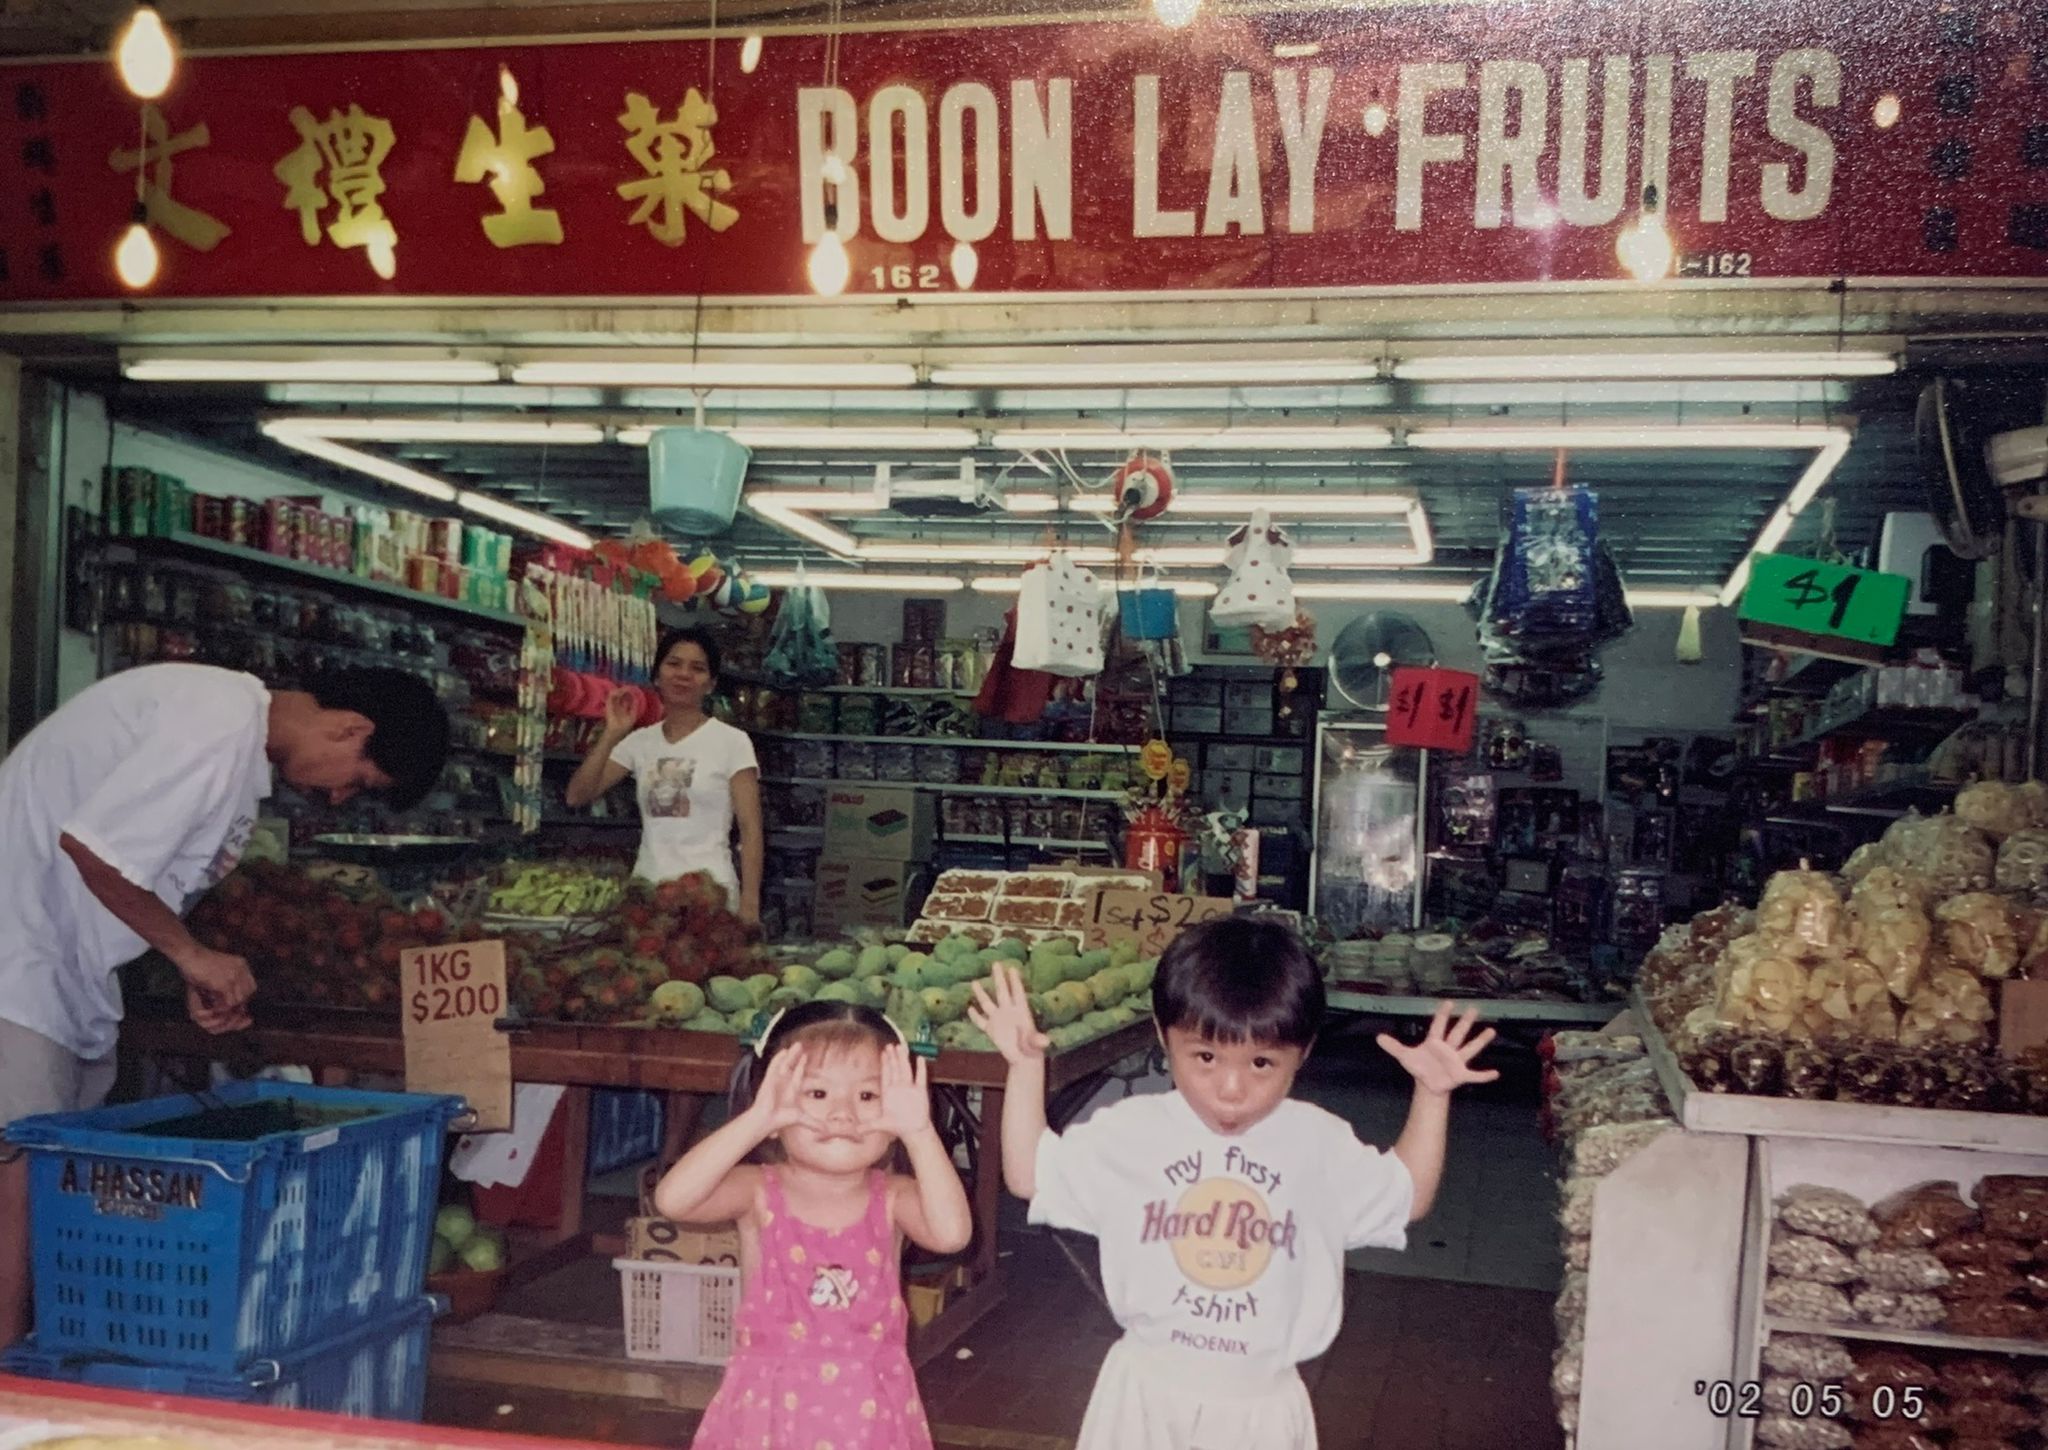 Boon lay fruit stall